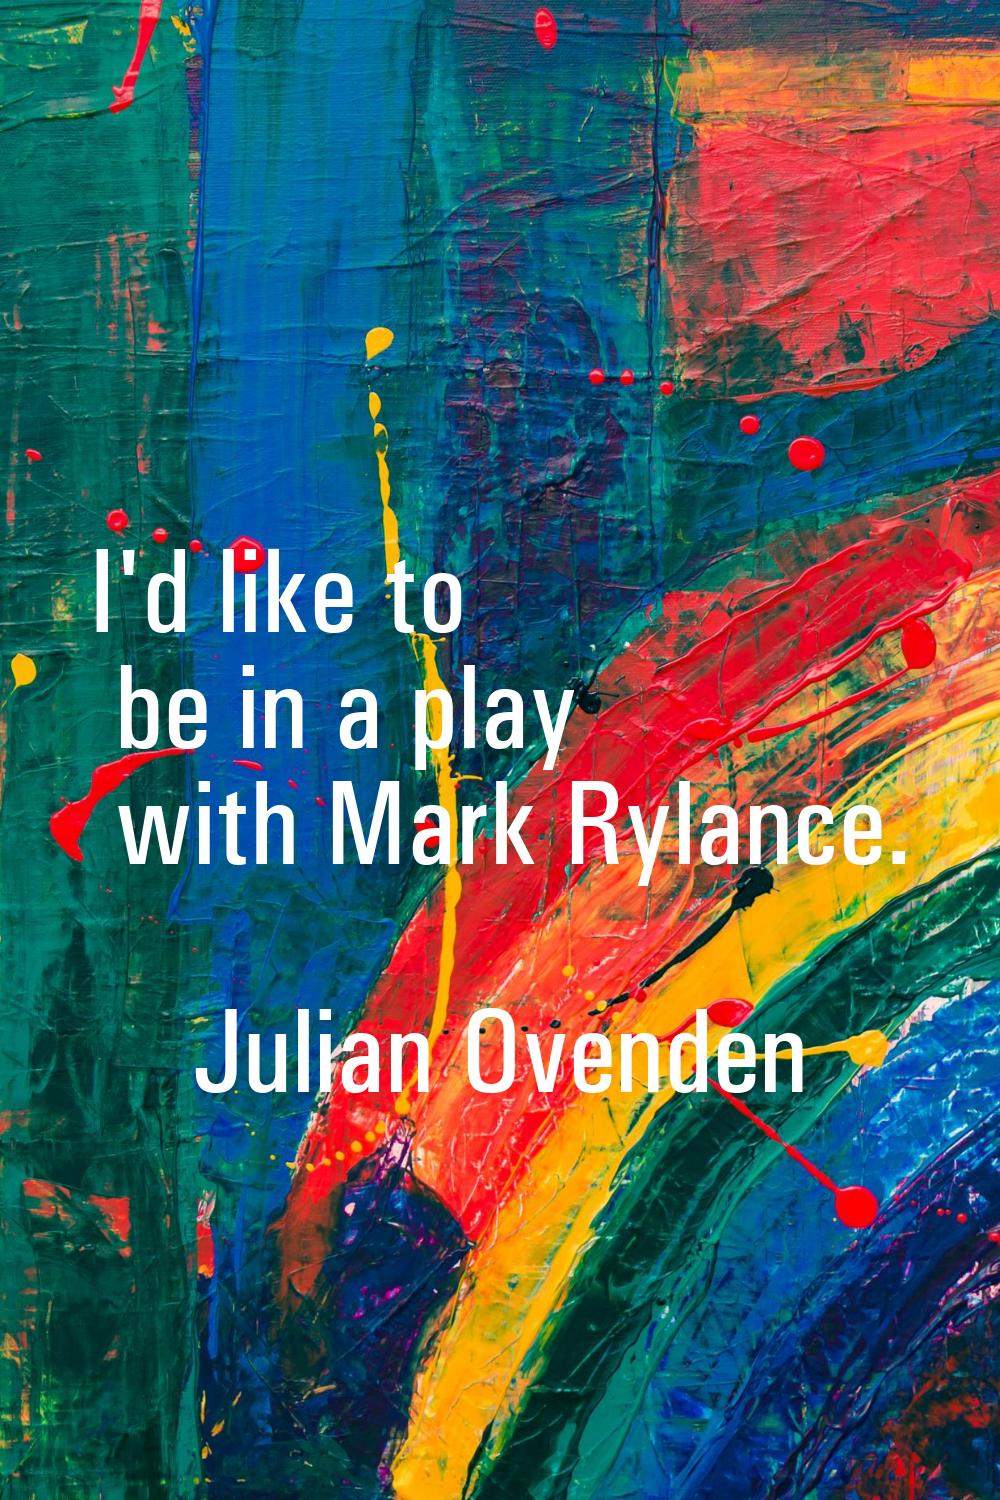 I'd like to be in a play with Mark Rylance.